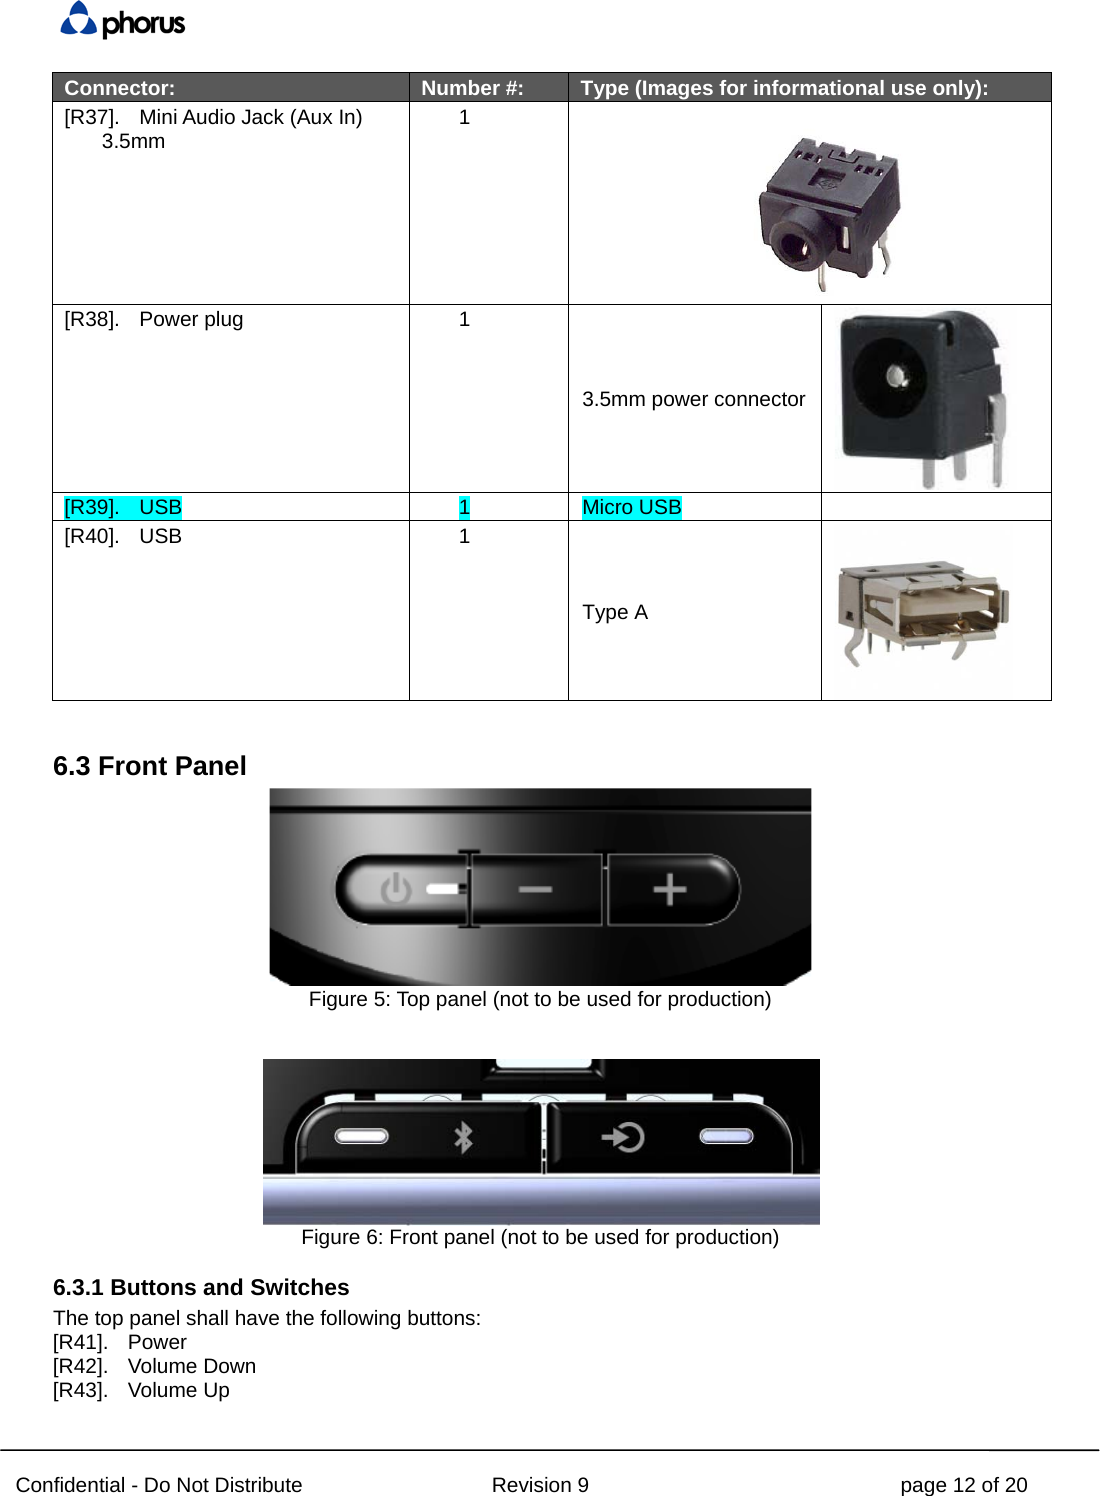  Confidential - Do Not Distribute Revision 9 page 12 of 20 Connector: Number #: Type (Images for informational use only): [R37]. Mini Audio Jack (Aux In) 3.5mm 1  [R38]. Power plug 1 3.5mm power connector  [R39]. USB 1 Micro USB  [R40]. USB 1 Type A   6.3 Front Panel  Figure 5: Top panel (not to be used for production)    Figure 6: Front panel (not to be used for production) 6.3.1 Buttons and Switches The top panel shall have the following buttons: [R41]. Power  [R42]. Volume Down  [R43]. Volume Up  